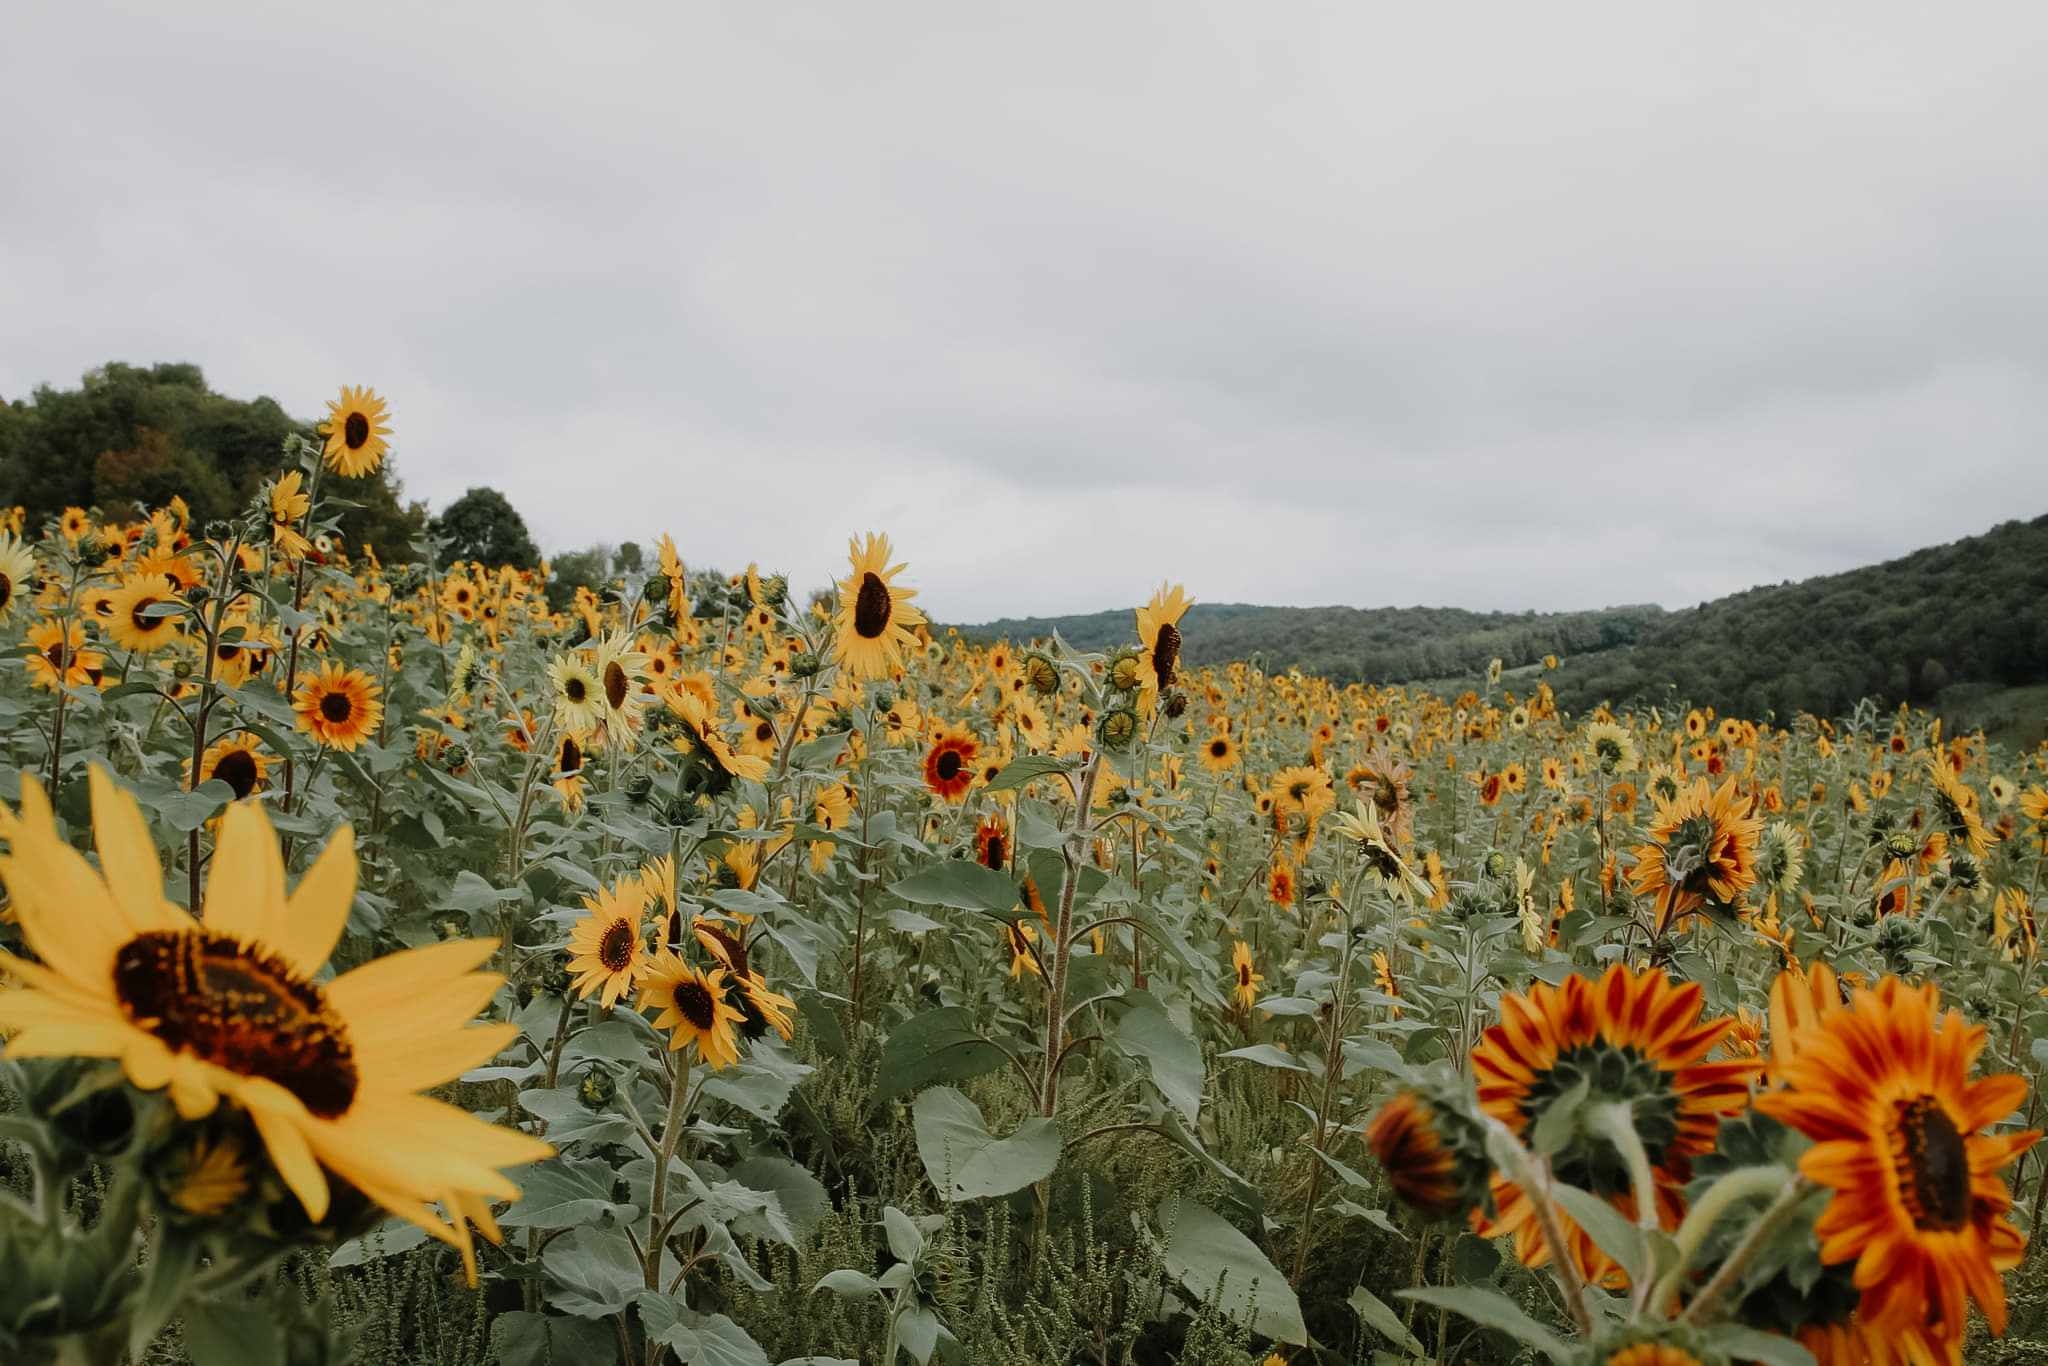 Sunflowers at the Songin Farm